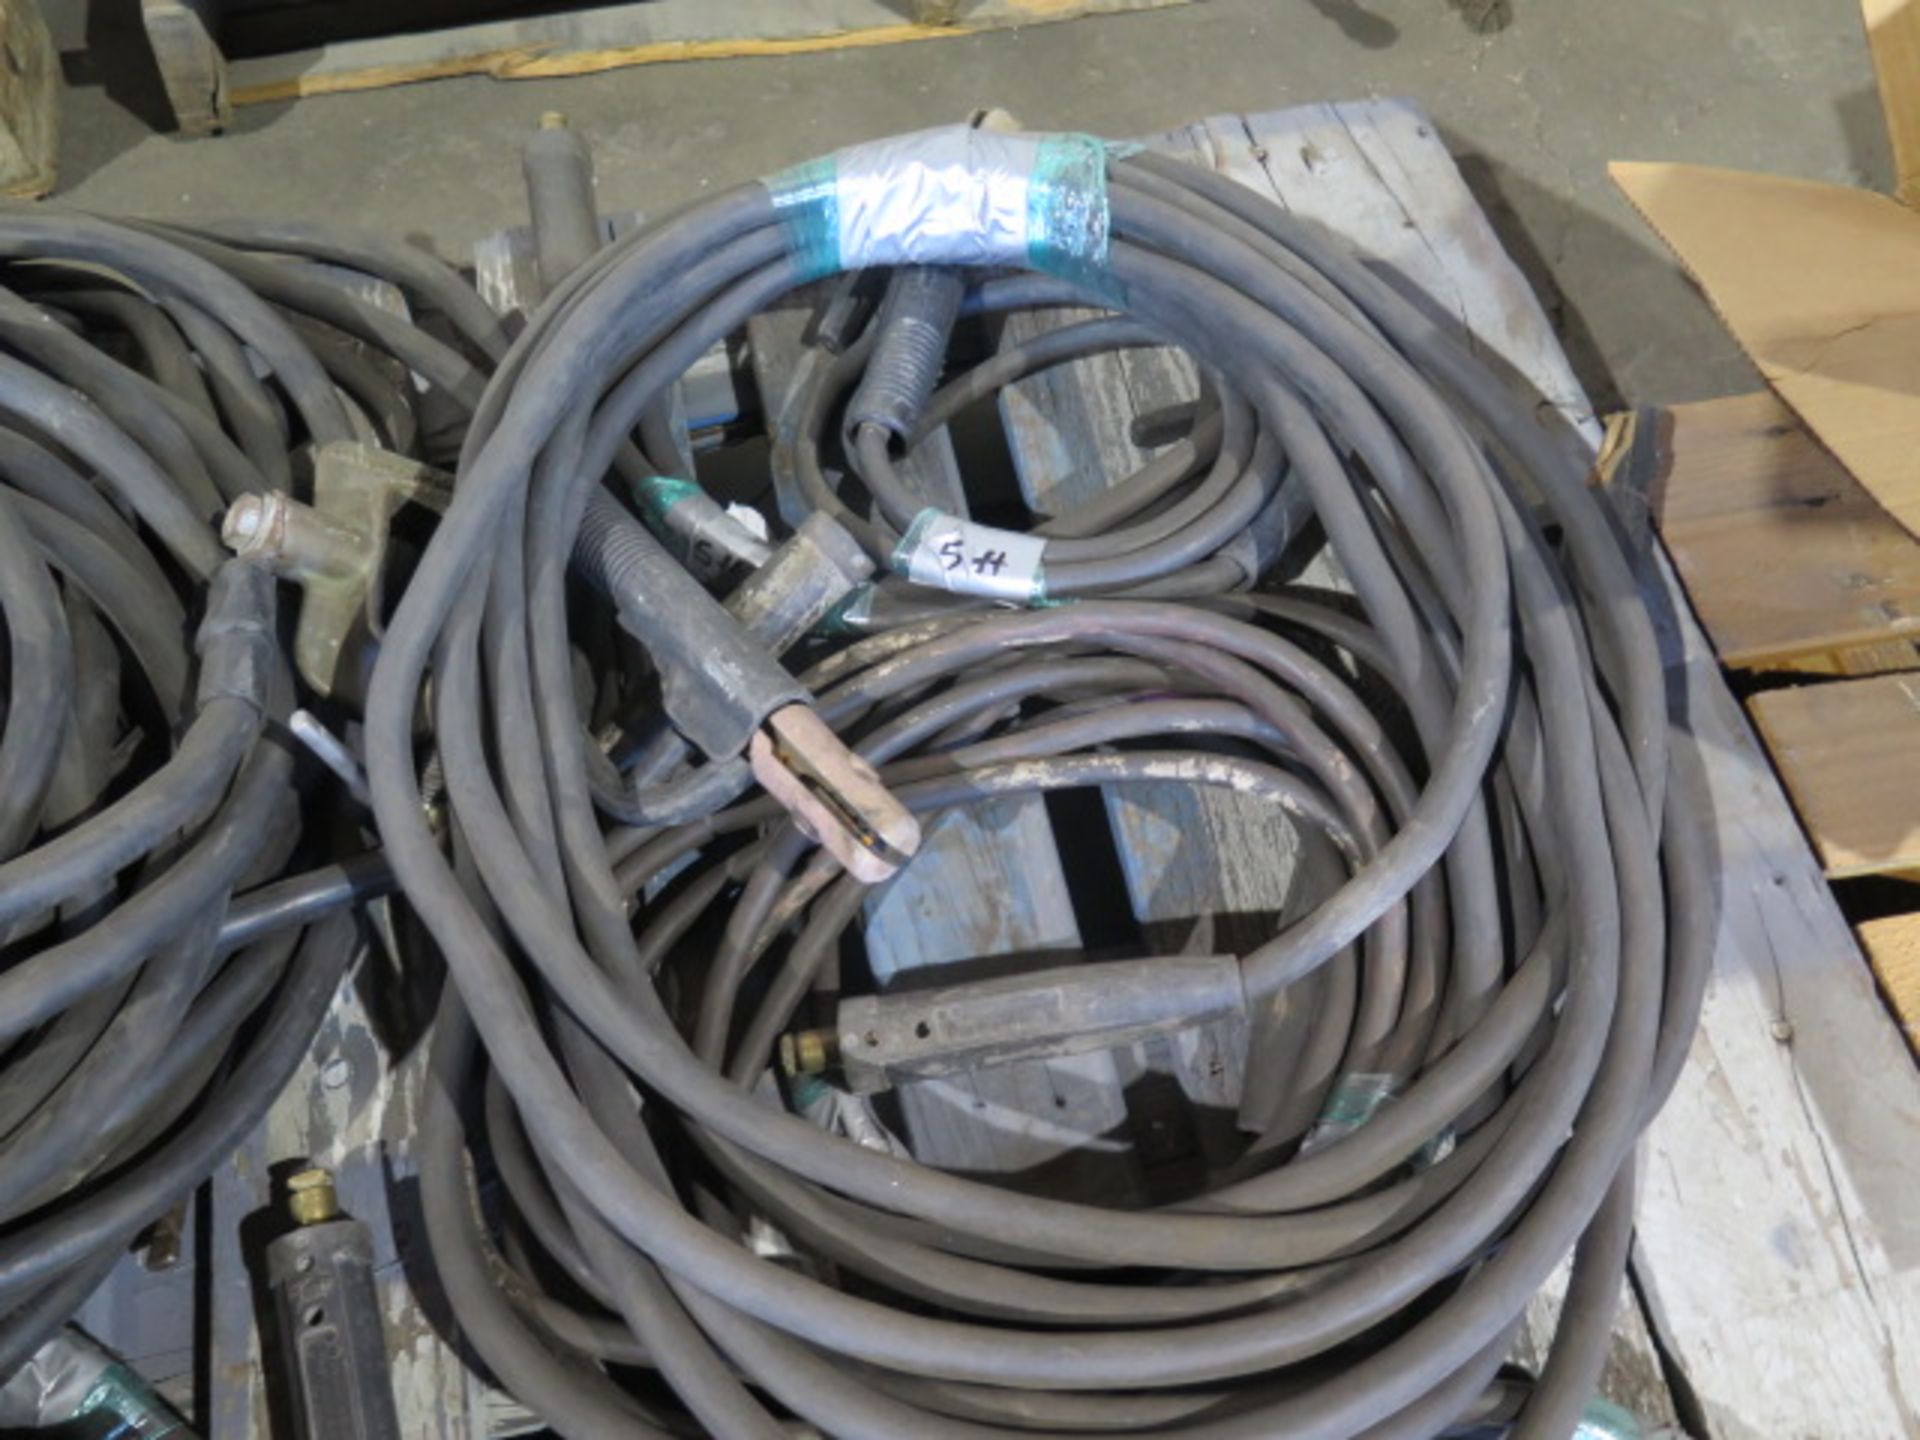 Welding 200 Volt Heavy Duty Welding Leads W/ Ground and Stingers (SOLD AS-IS - NO WARRANTY) - Image 3 of 6